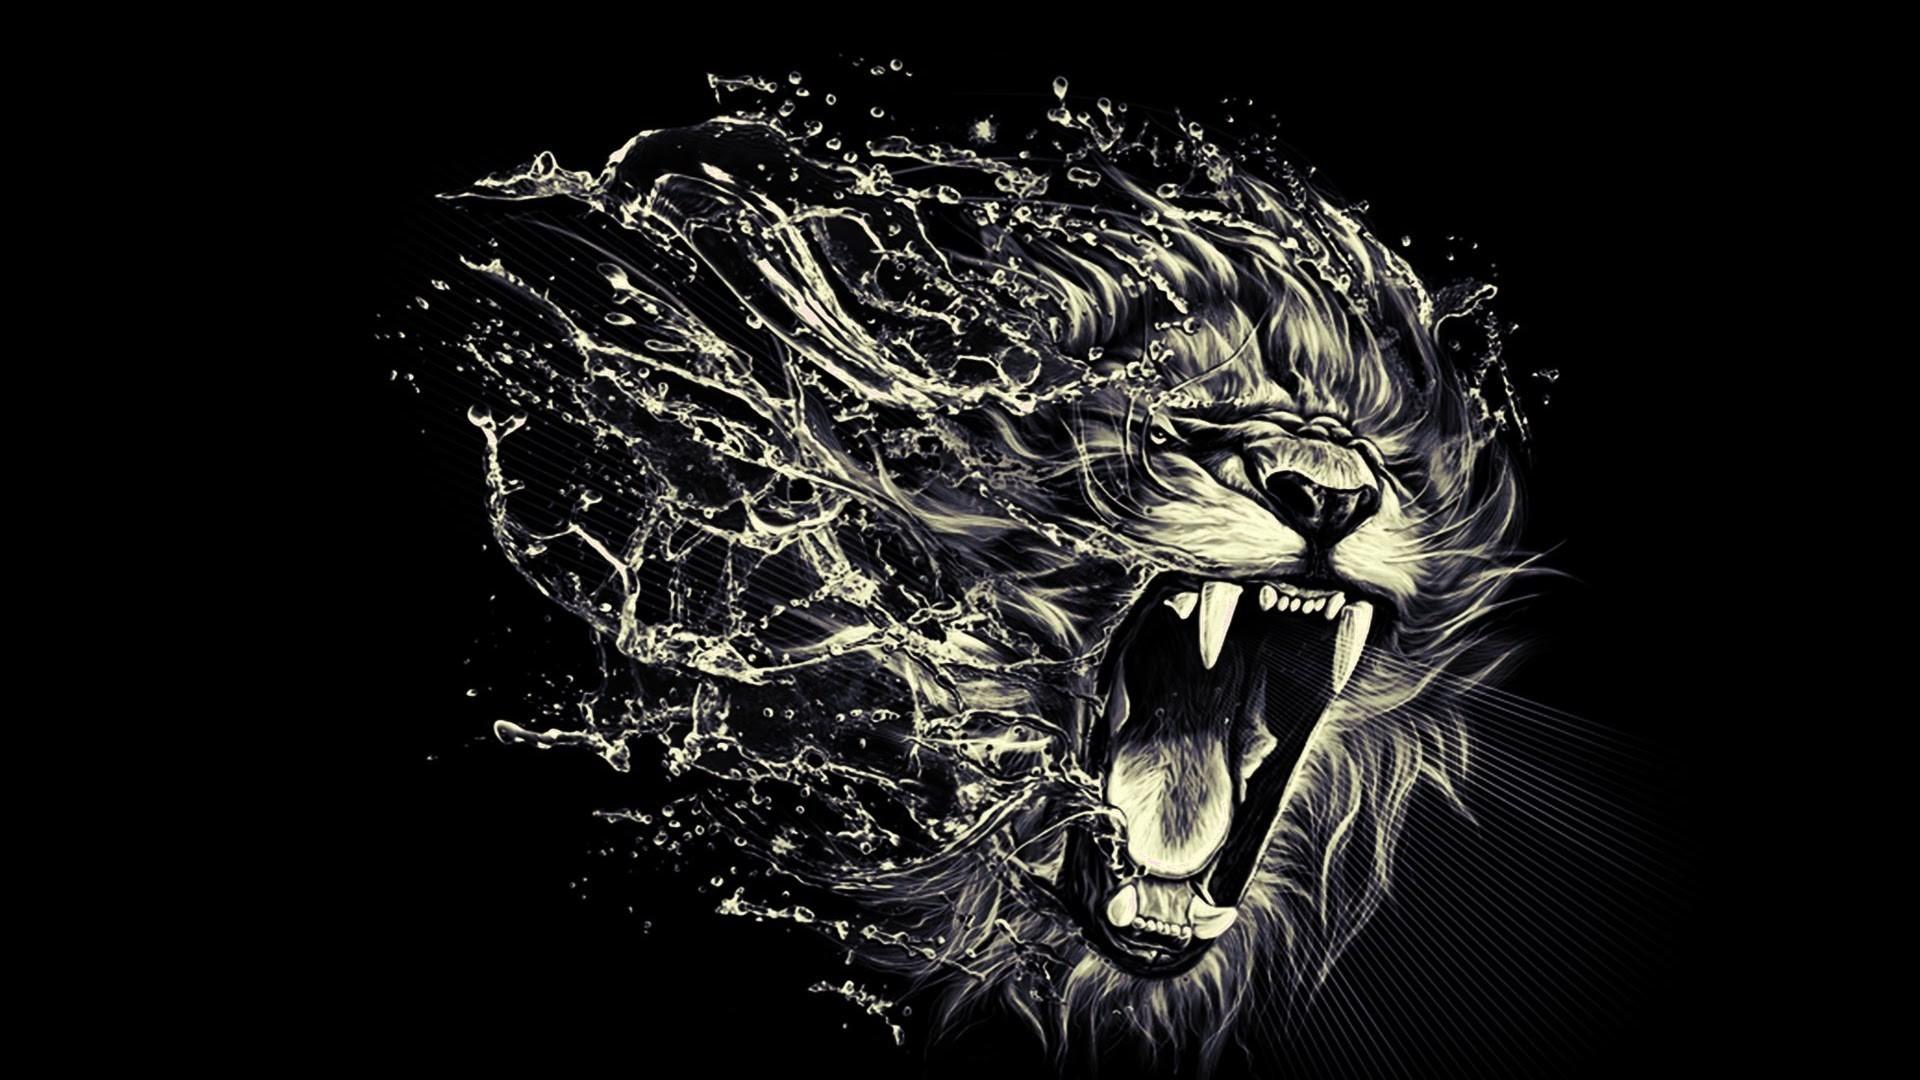 angry lion eyes wallpaper